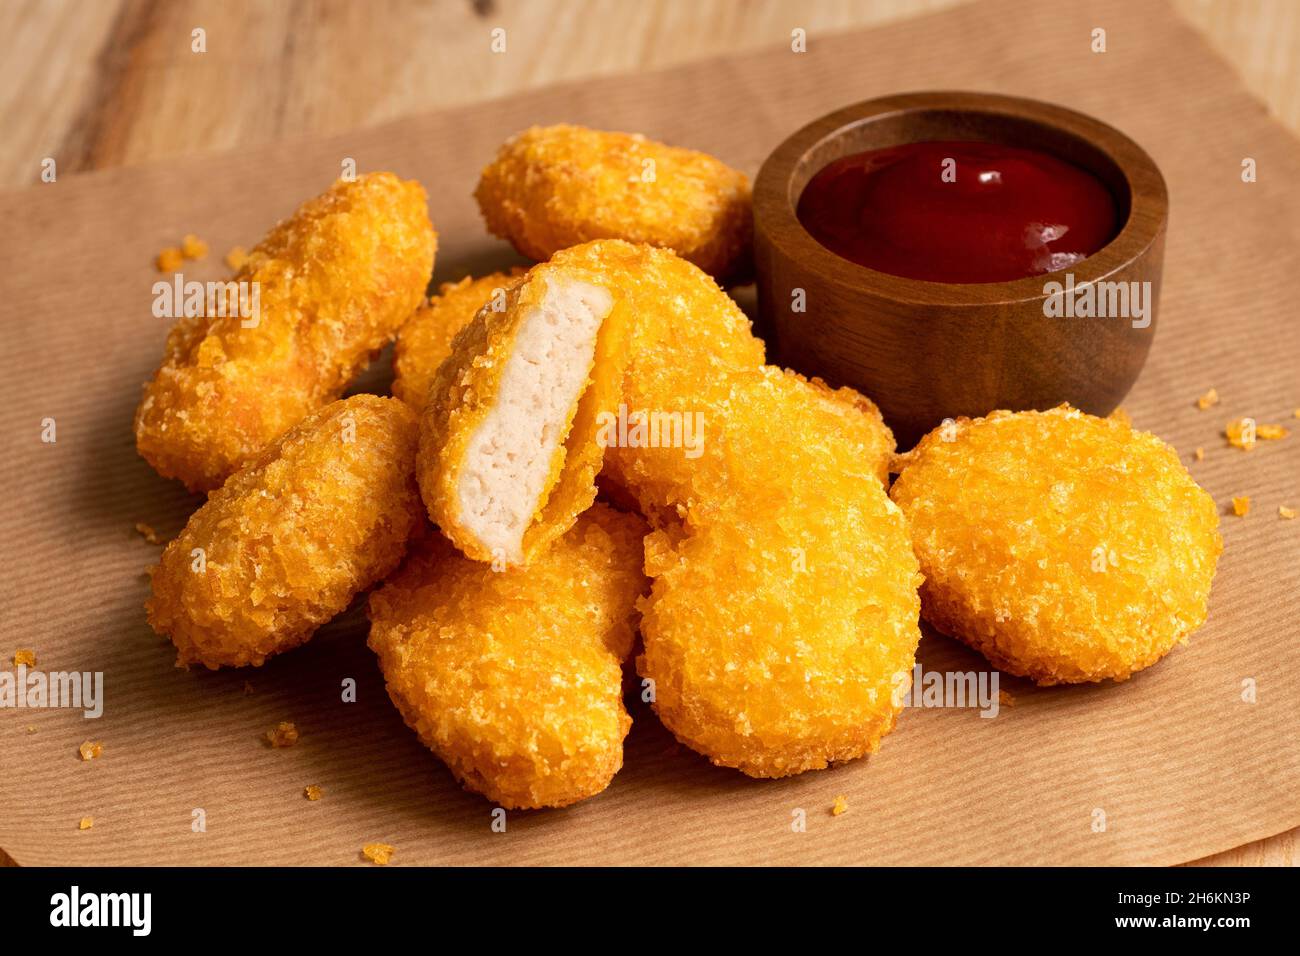 Fried gluten free cornflake crumb chicken nuggets next to a wood bowl of ketchup on brown baking paper. Stock Photo